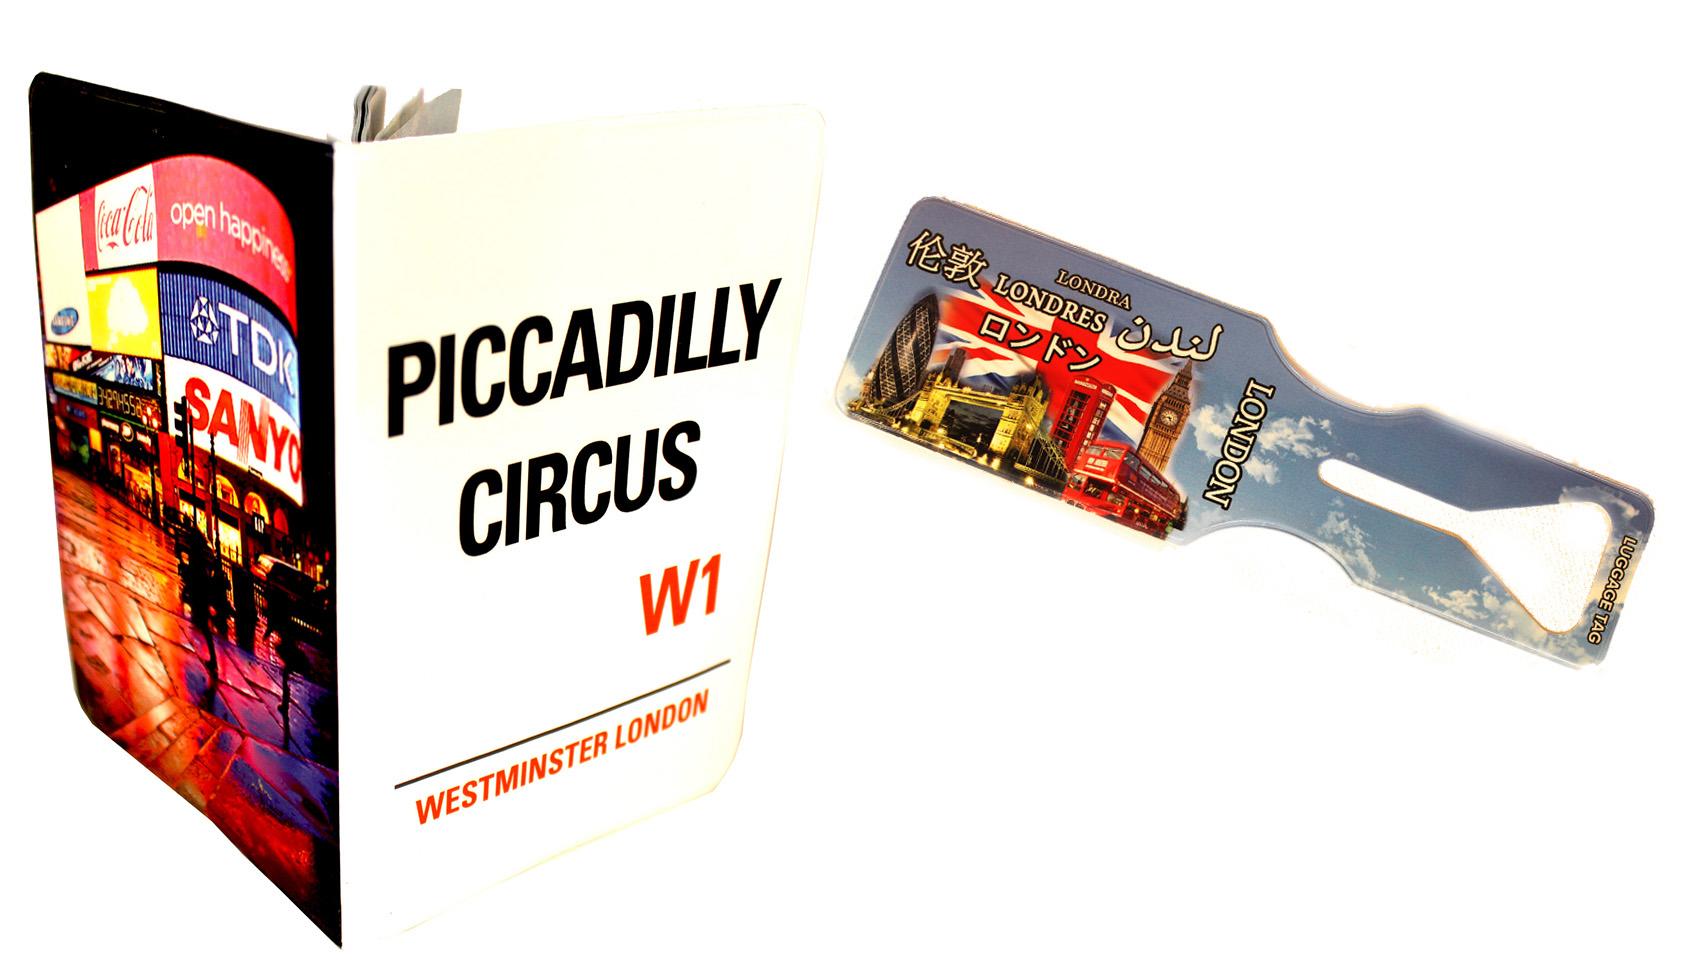 Piccadilly Circus and London Montage Passport Cover and Luggage Tag Set